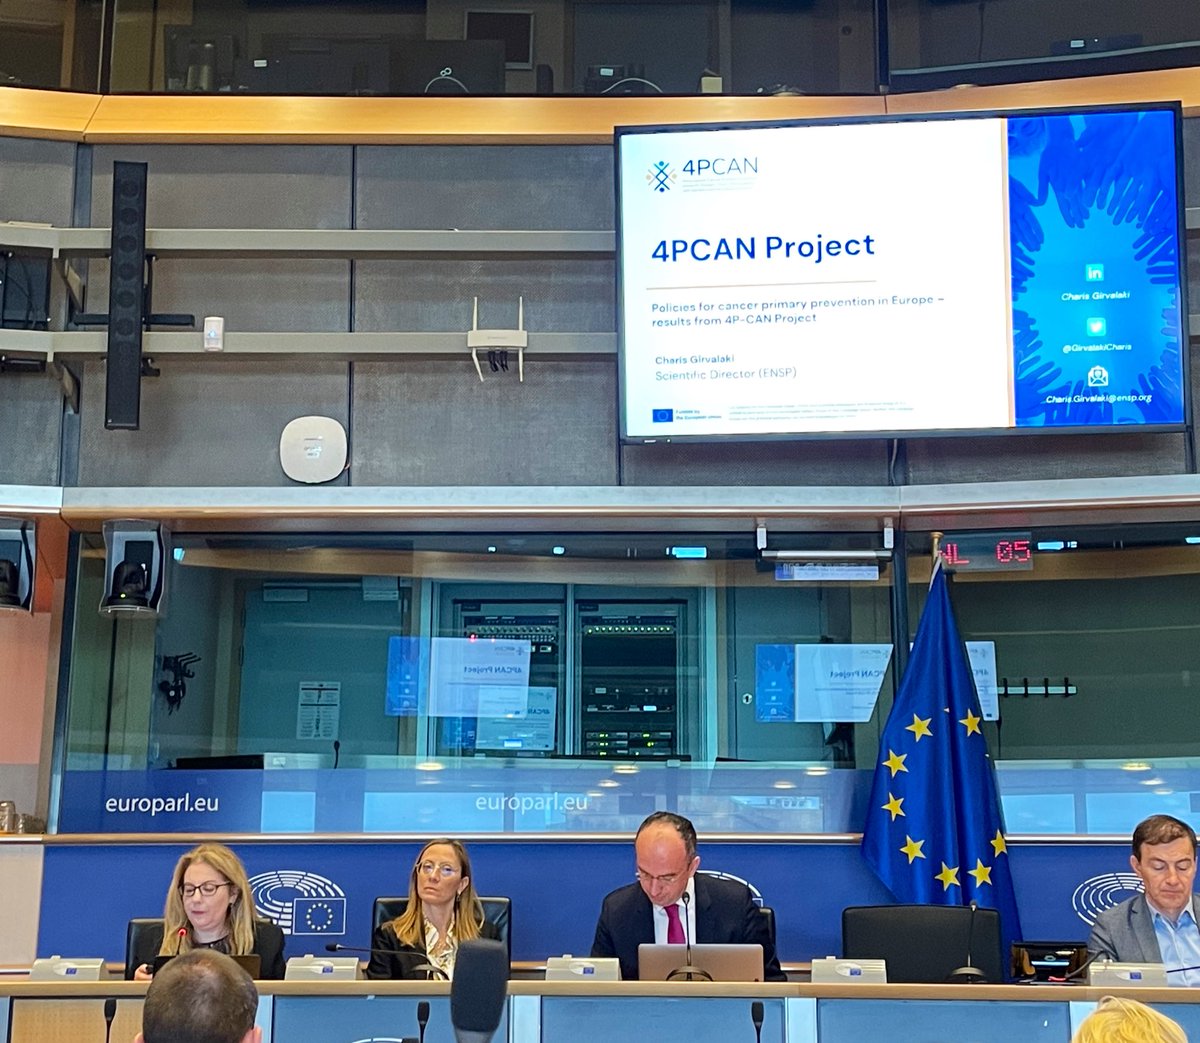 “If current knowledge about #CancerPrevention was implemented and citizens would adopt and practice it, 50% of cancer deaths in Europe could be prevented.” ENSP Scientific Director @GirvalakiCharis presenting different policies for cancer #PrimaryPrevention from @4PCAN_Project